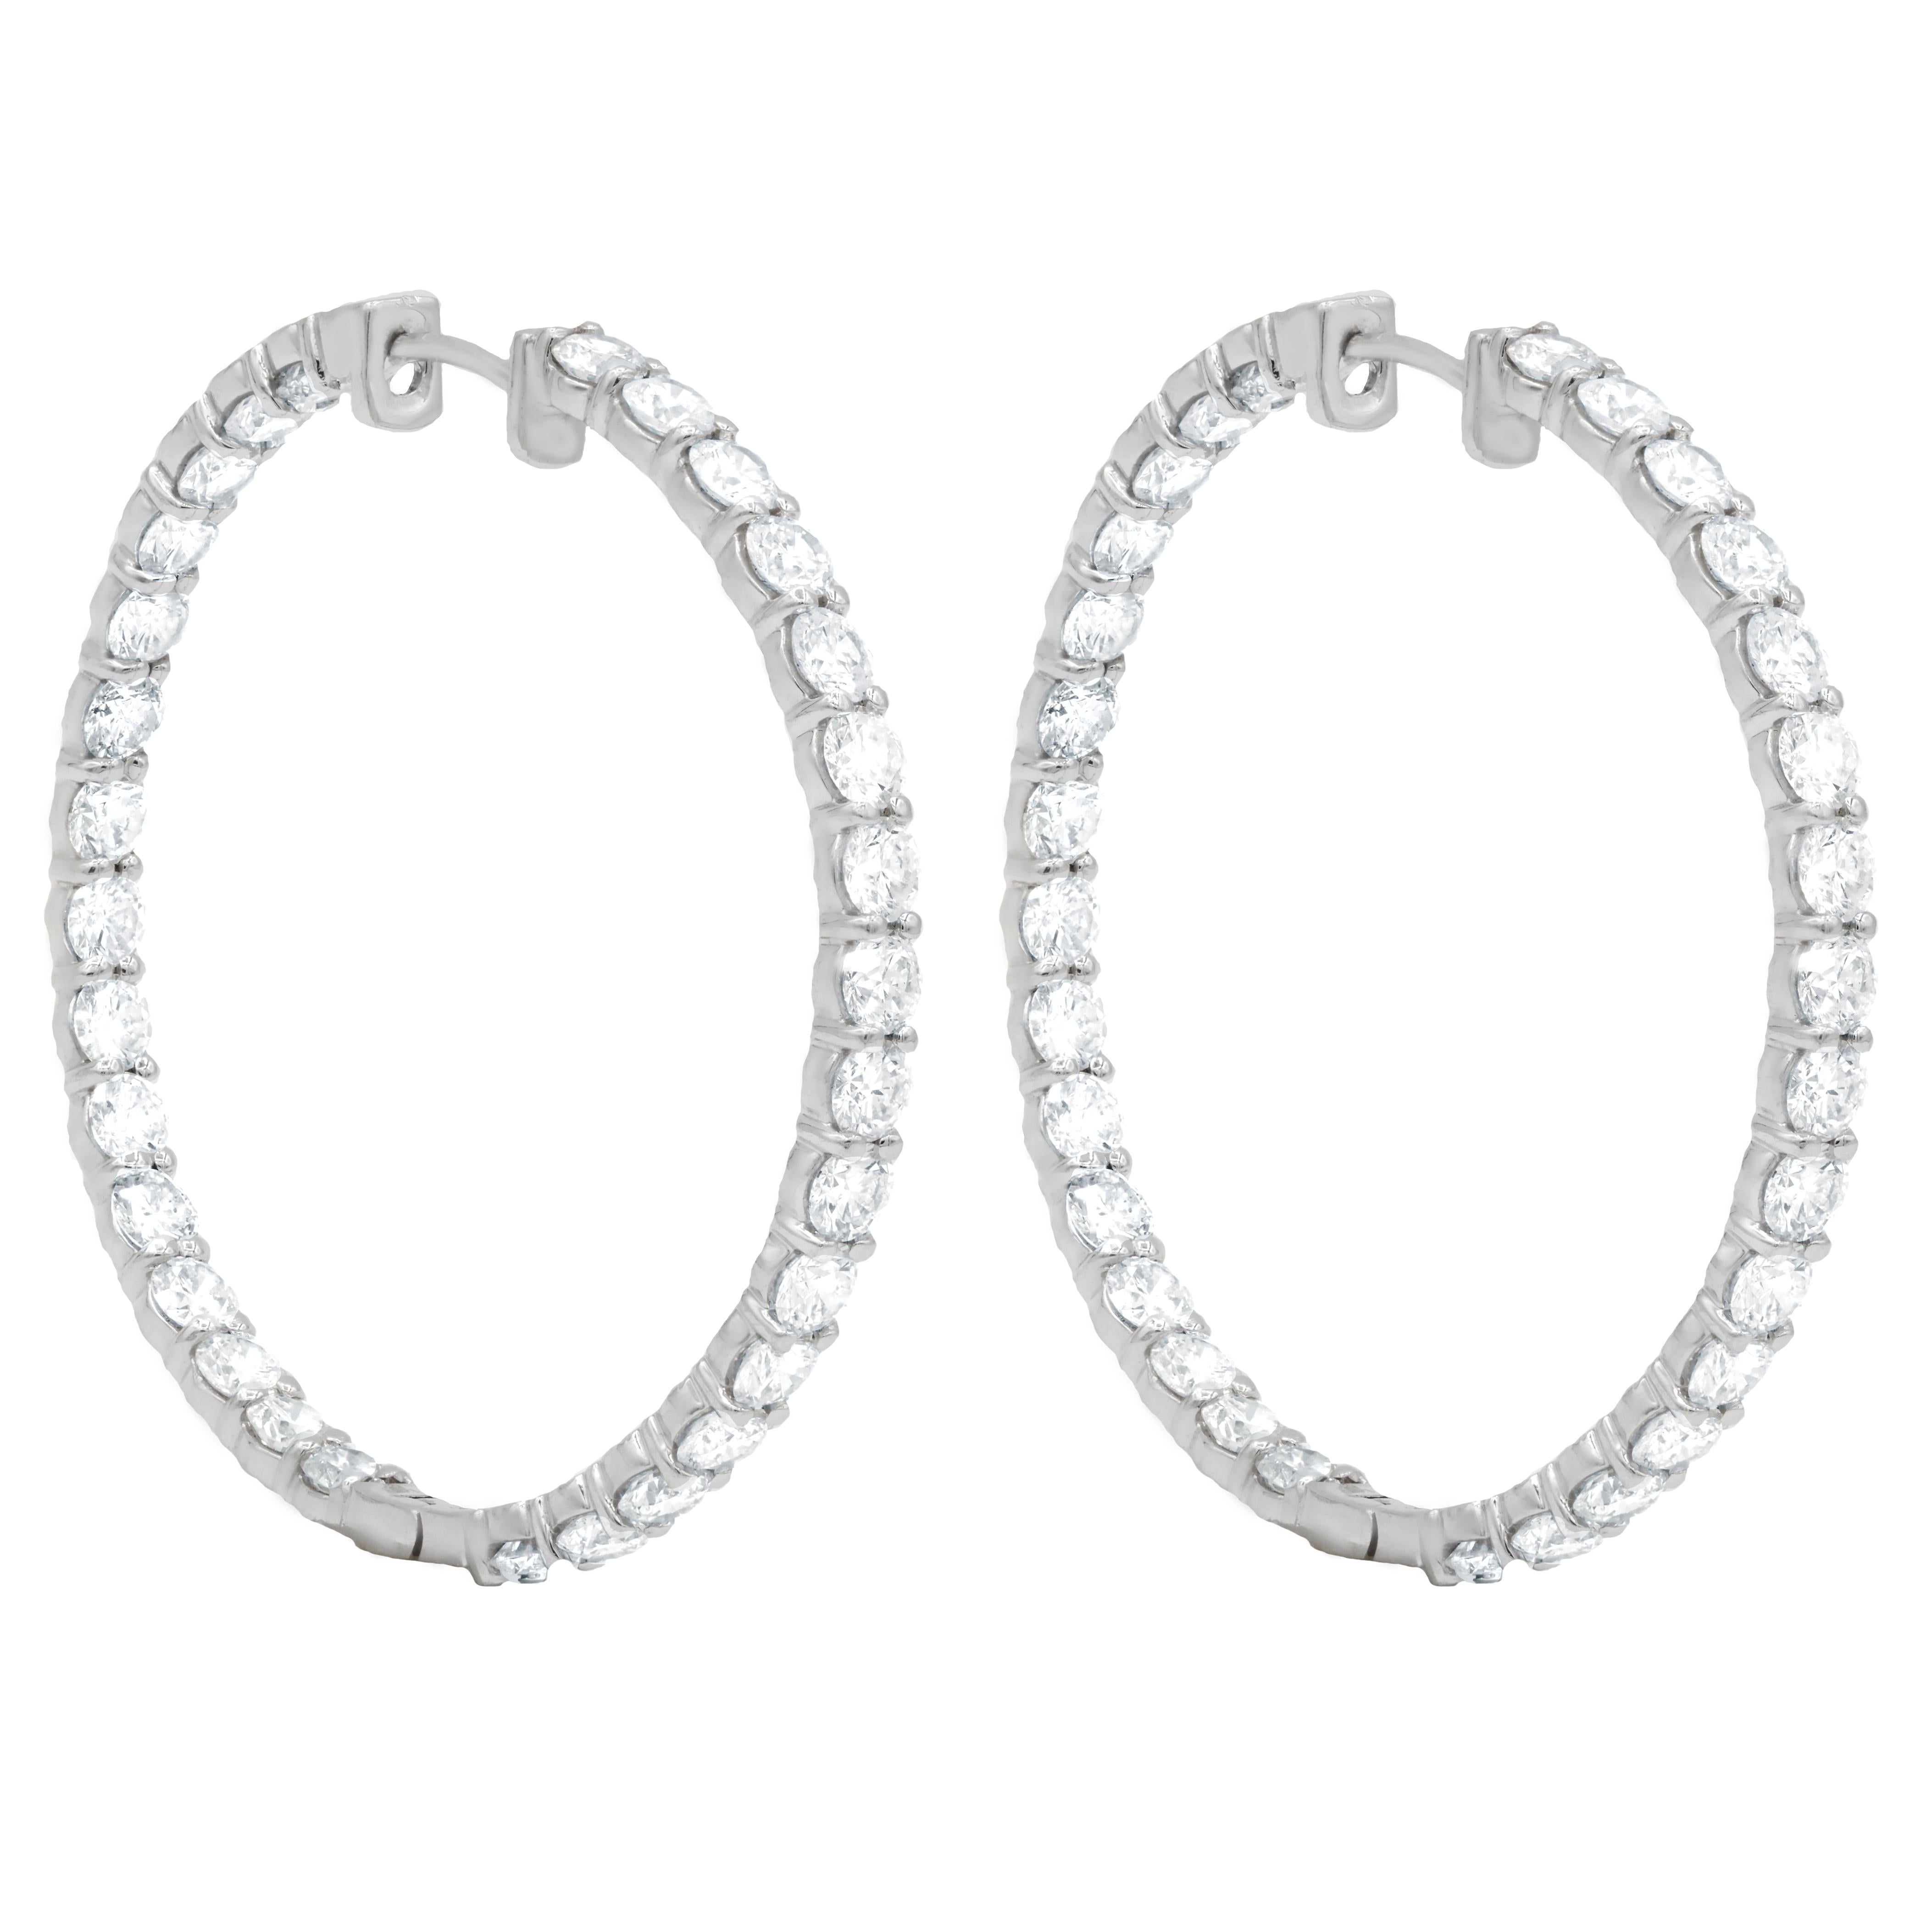 Modern Diana M. 18 kt white gold inside-out hoop earrings adorned with 15.60 cts For Sale